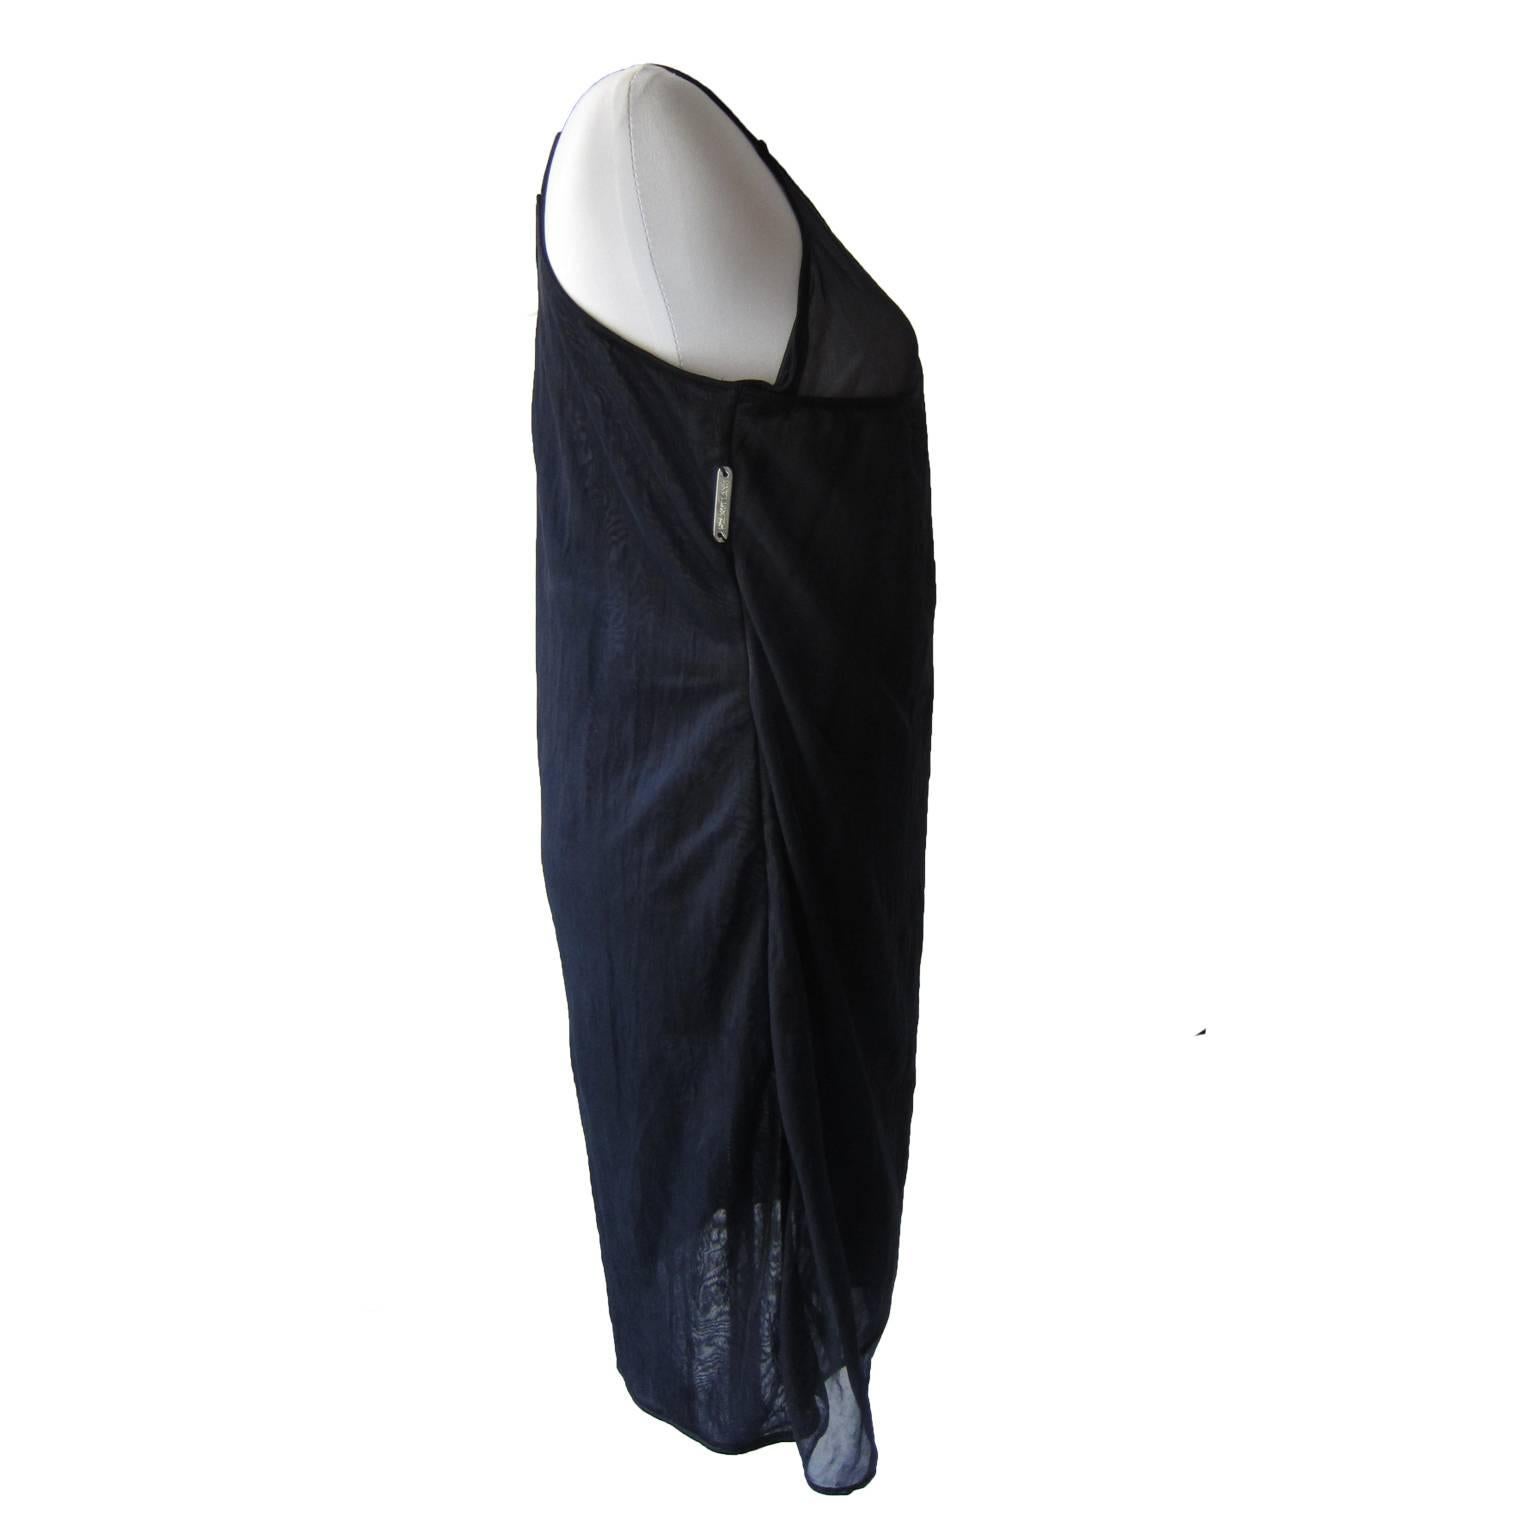 Helmut Lang Sheer Navy Layered Dress SS 1995 In Good Condition For Sale In Berlin, DE